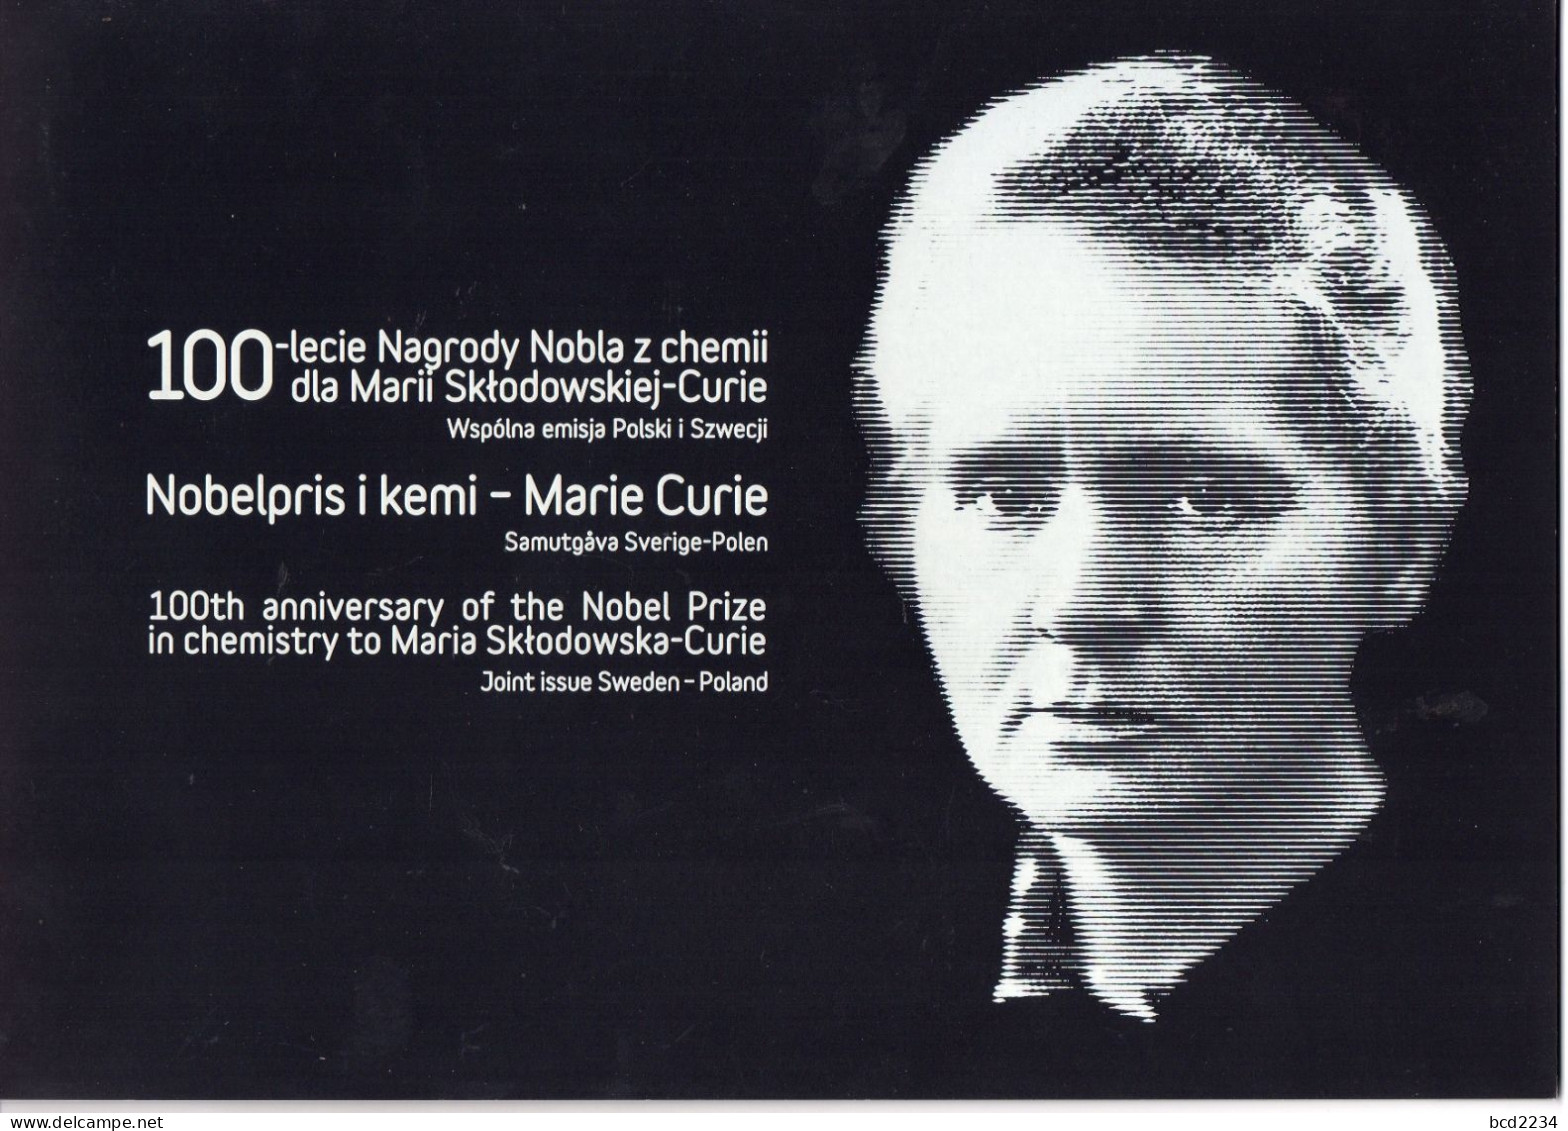 POLAND 2011 LIMITED EDITION: RARE 100TH ANNIVERSARY MARIE CURIE NOBEL PRIZE CHEMISTRY FOLDER FDC MS PL SWEDEN - Emissioni Congiunte